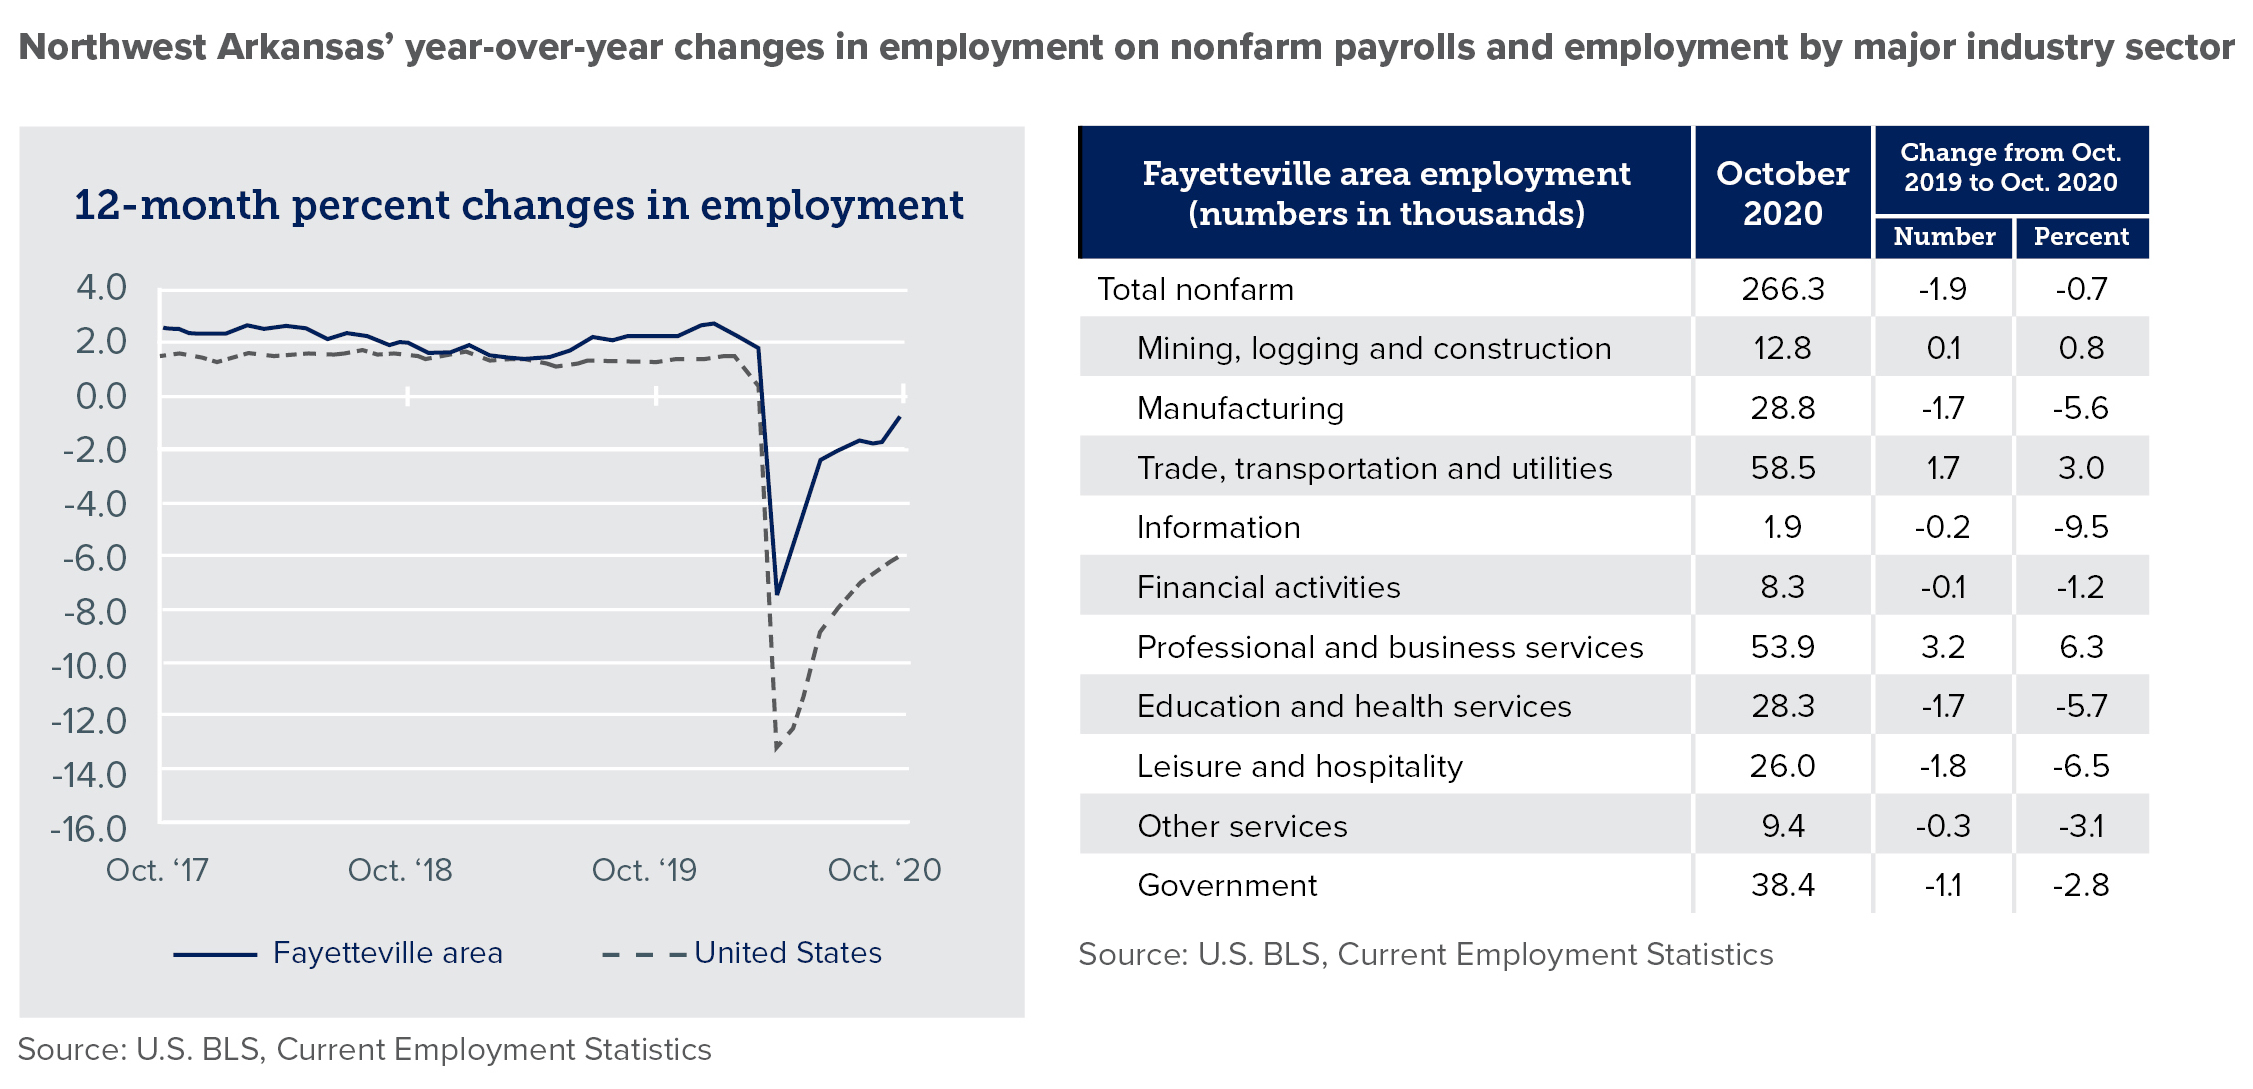 NW Arkansas' year-over-year changes in employment on nonfarm payrolls and employment by major industry sector